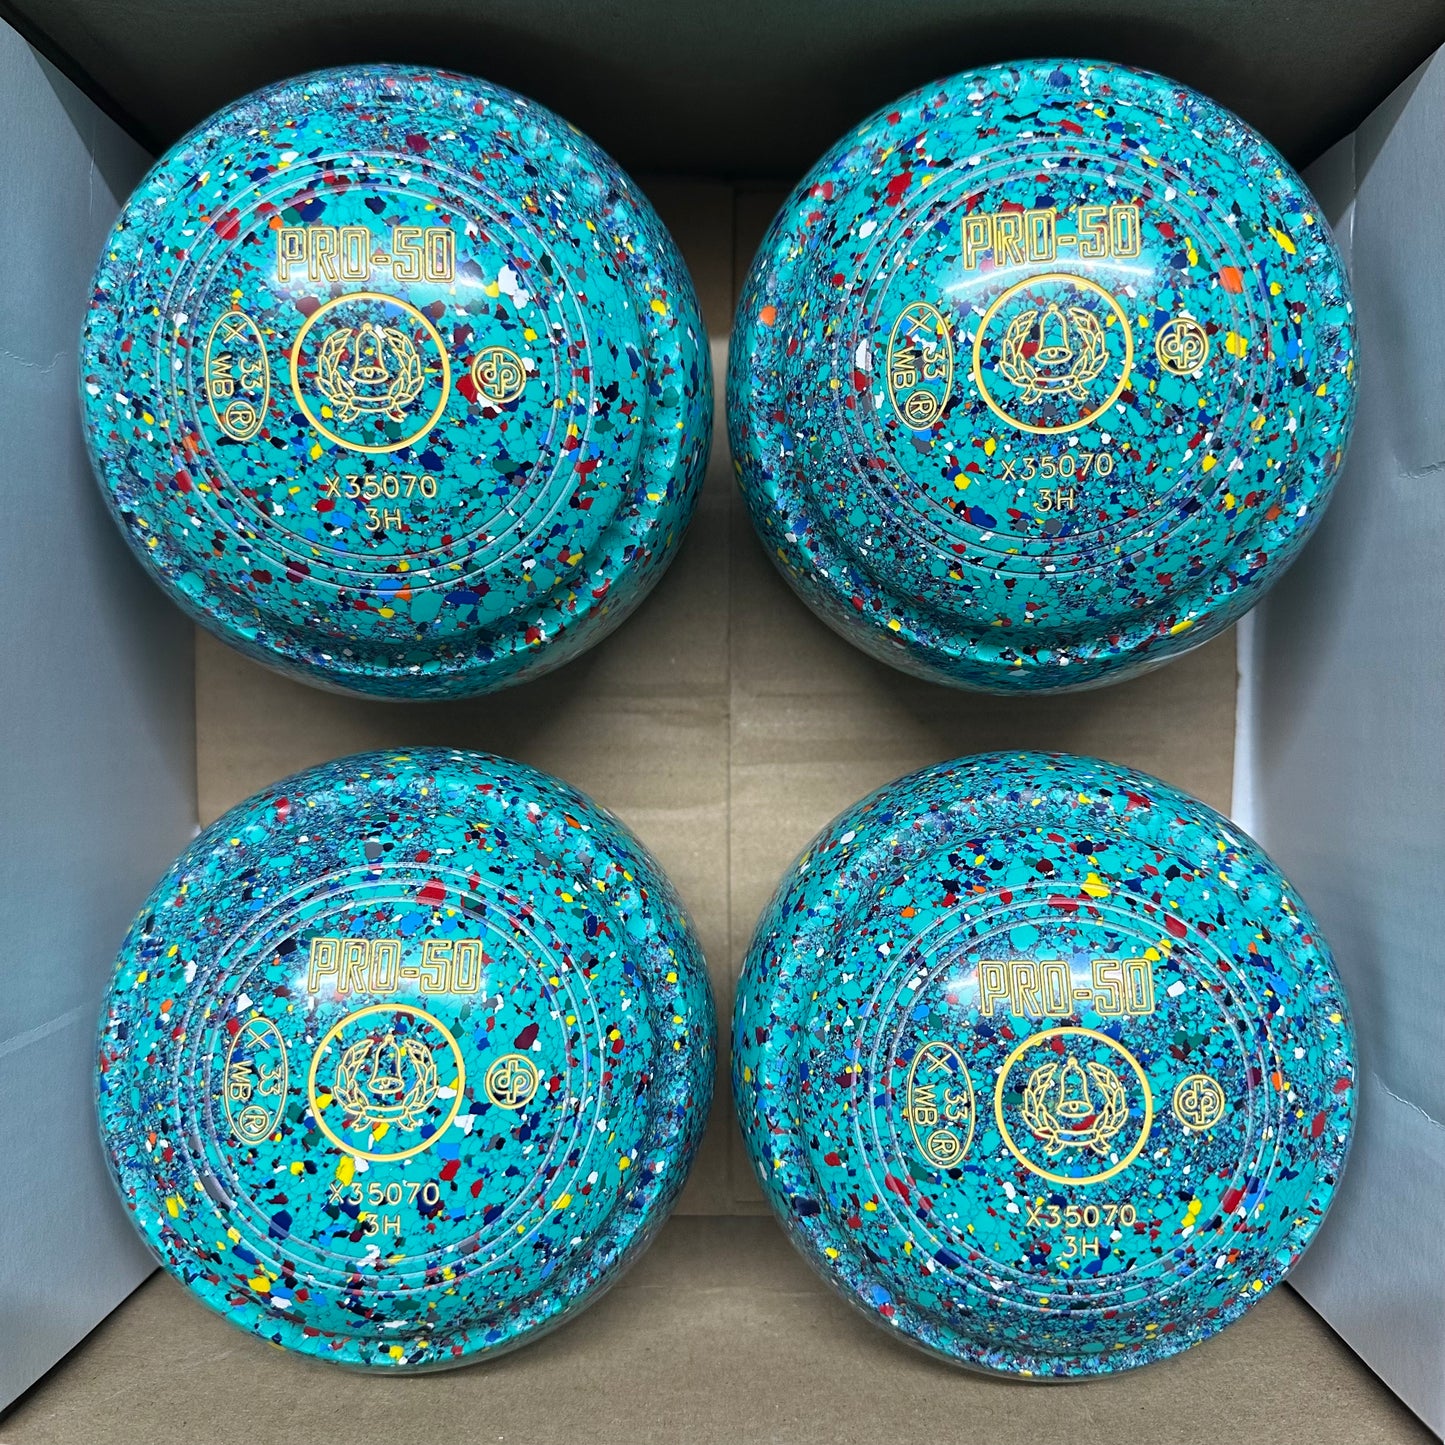 Drakes Pride PRO-50 - Size 3H - Mint Harlequin (Yellow Rings) - WB33 Stamp